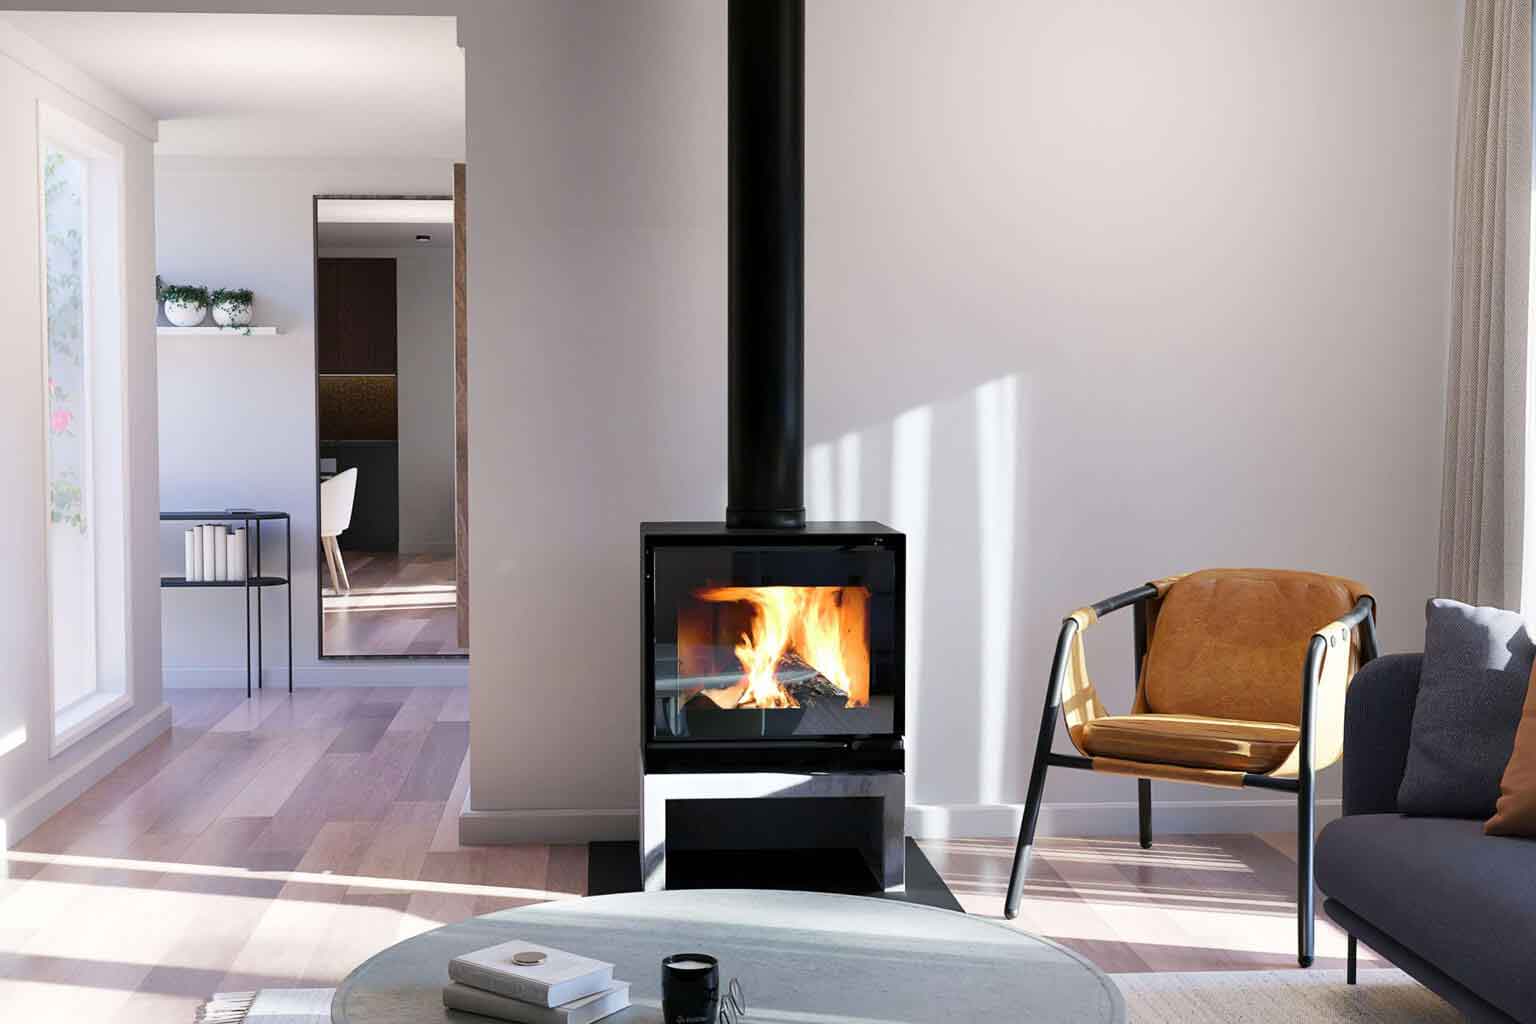 This Year’s Most Significant Trends in Fireplace Design